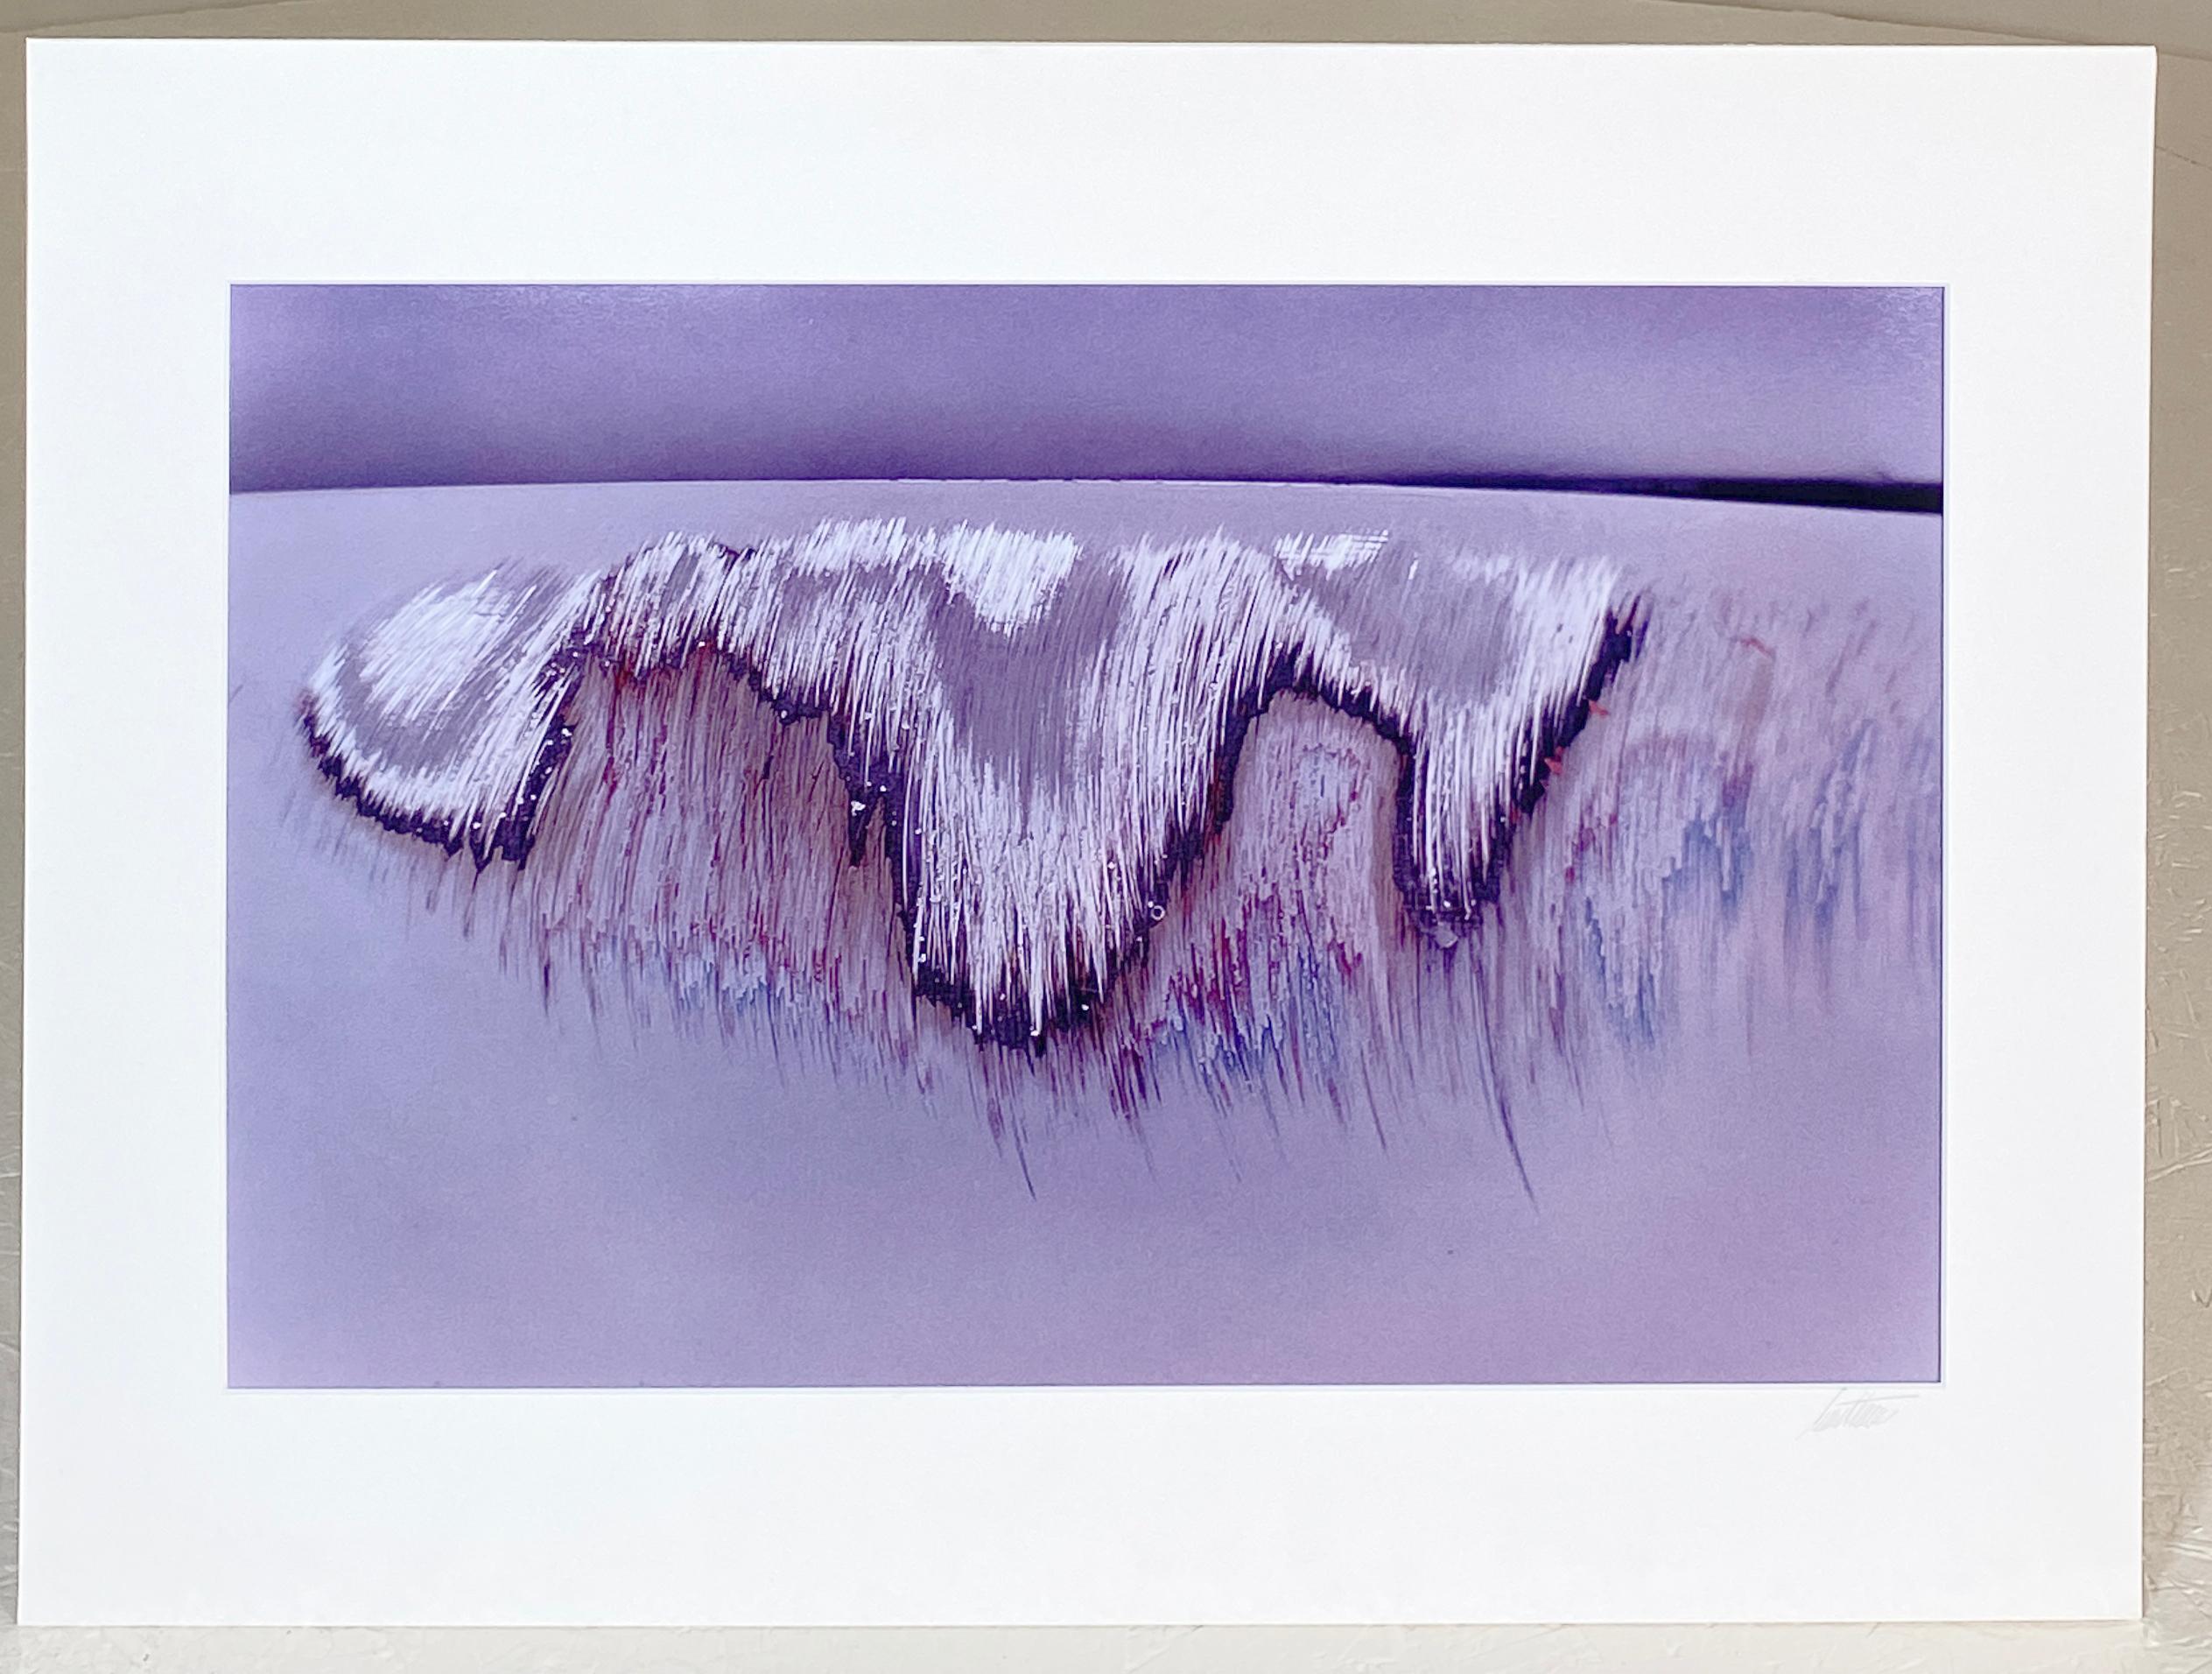 Original photography by Ernst Haas. Dye Transfer. Rare, he did a series of 